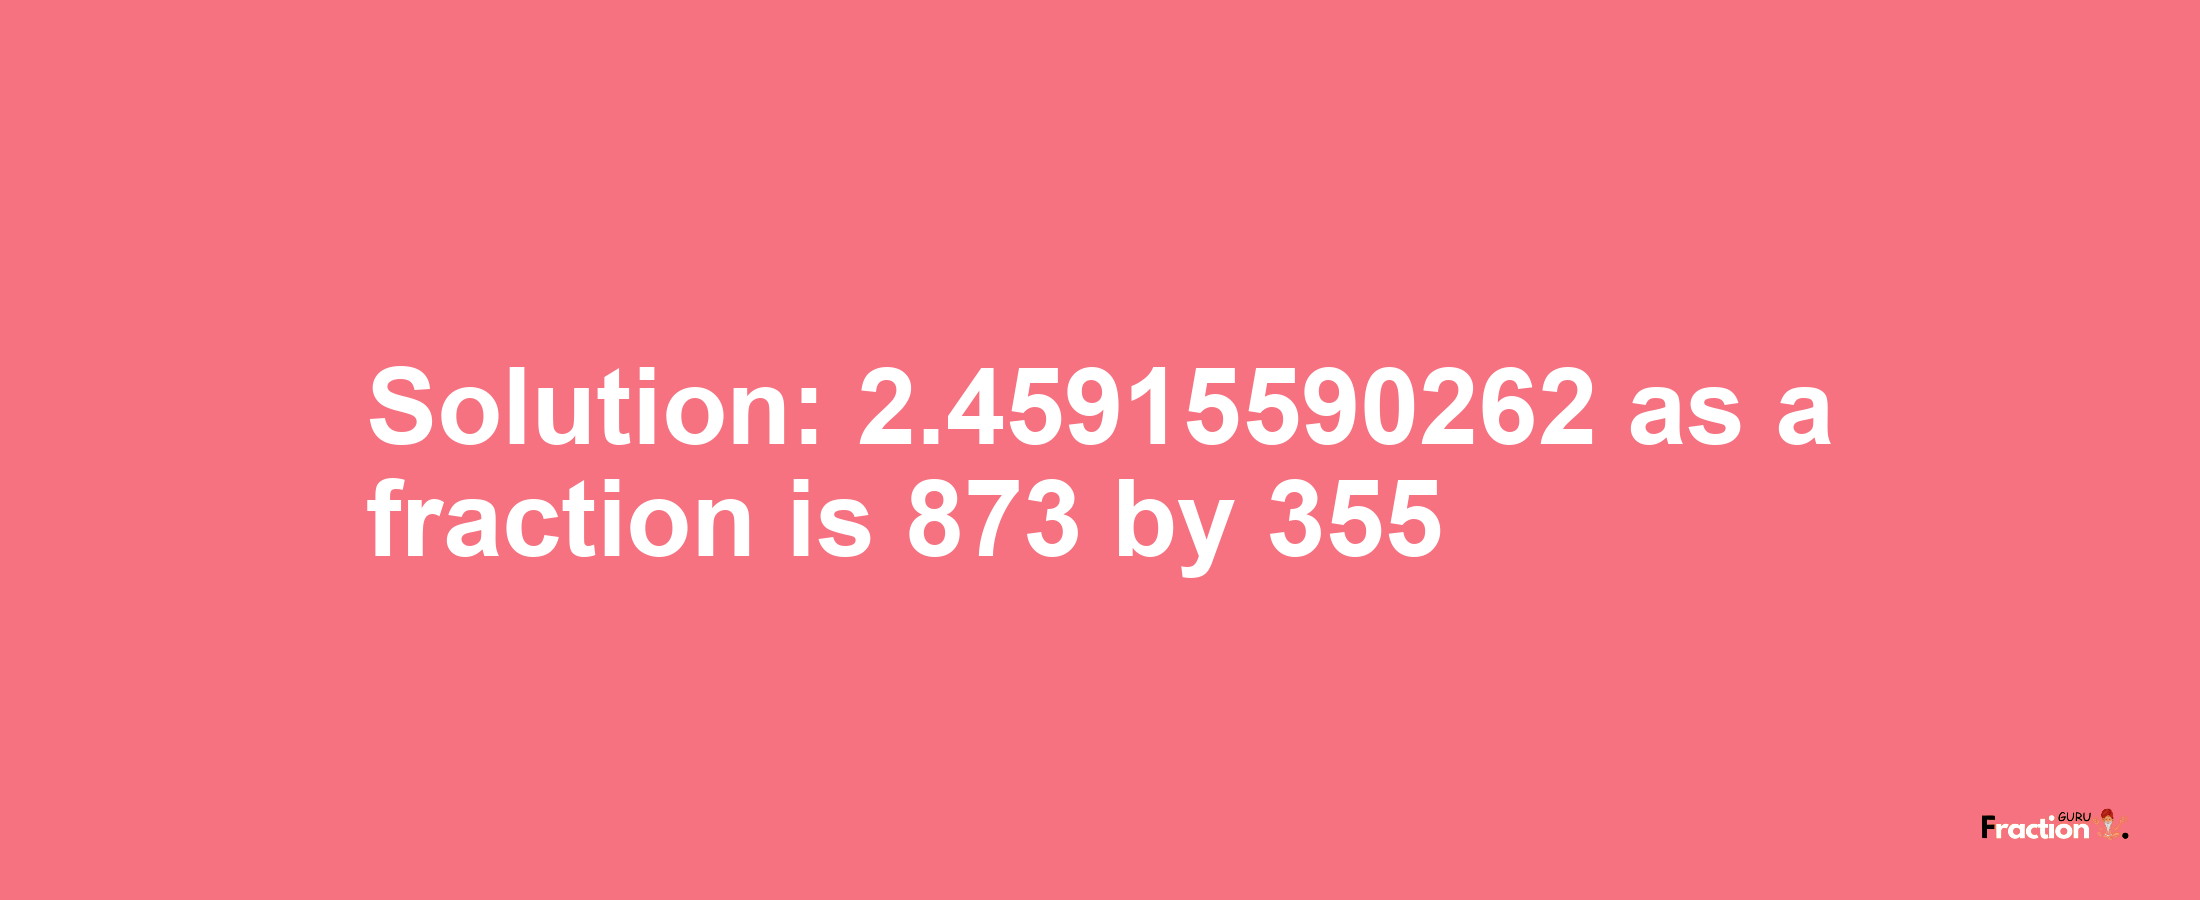 Solution:2.45915590262 as a fraction is 873/355